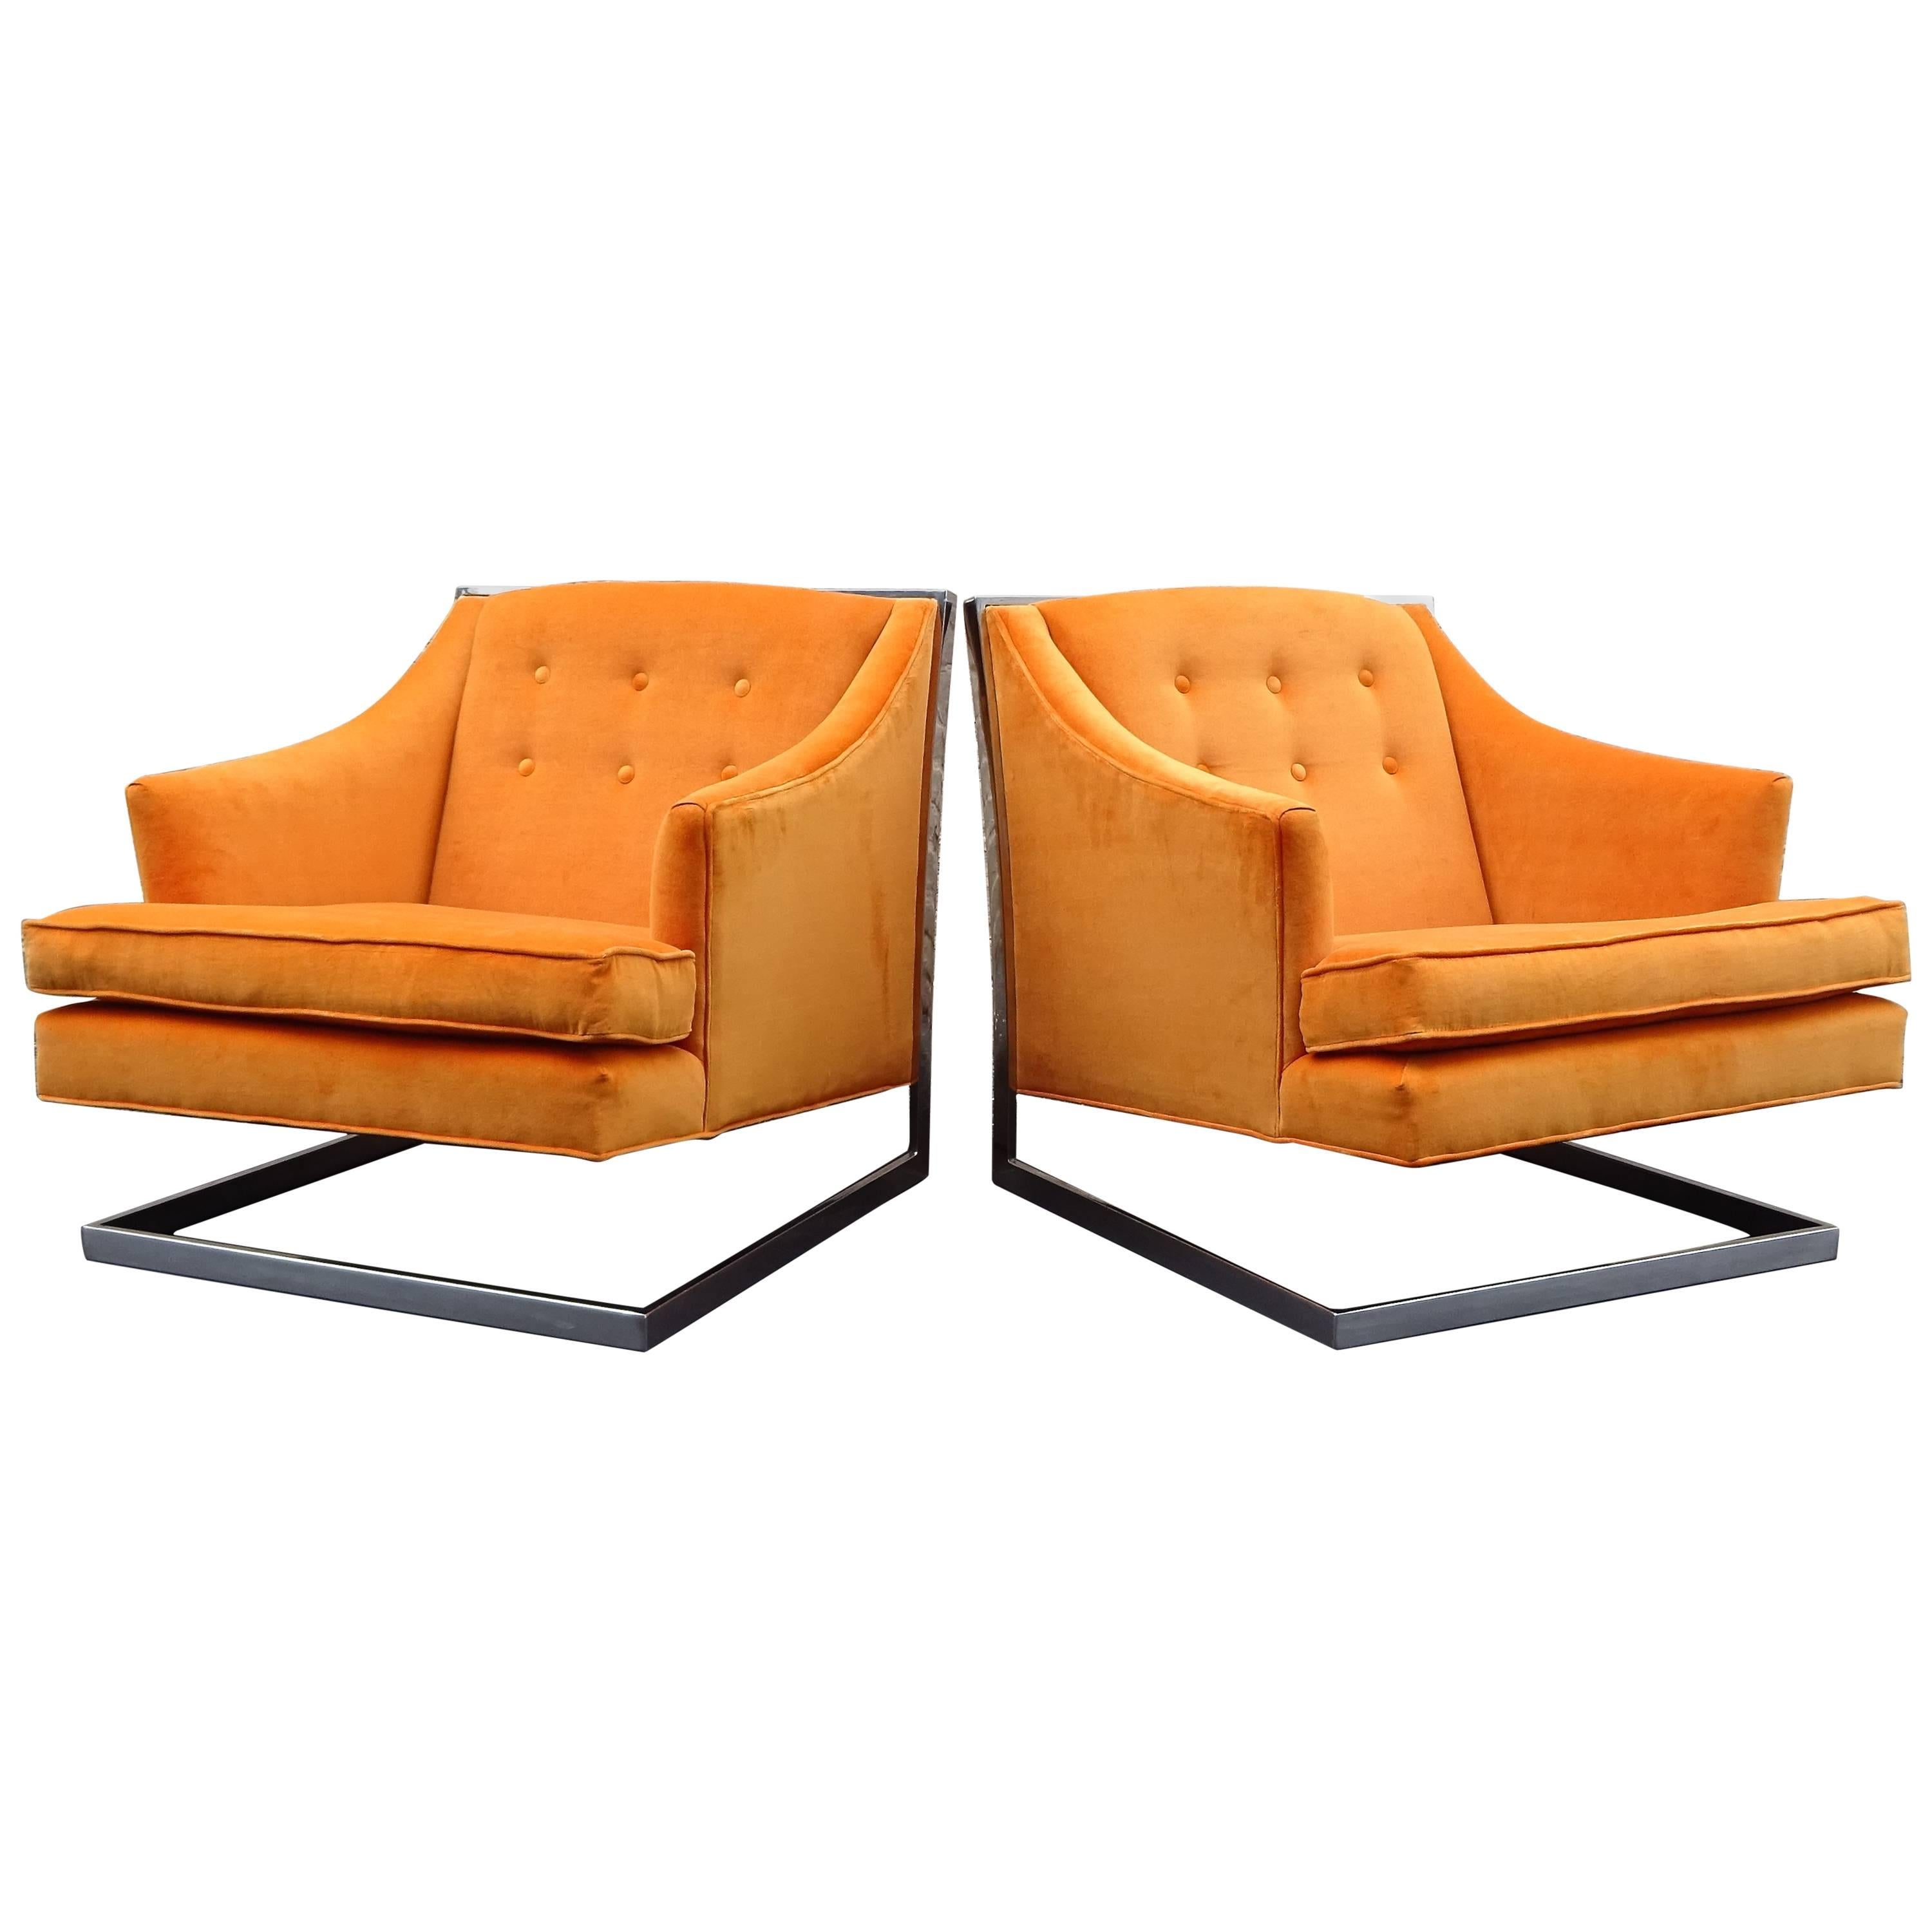 Fabulous Pair of 1970's Chrome Lounge Chairs After Milo Baughman For Sale